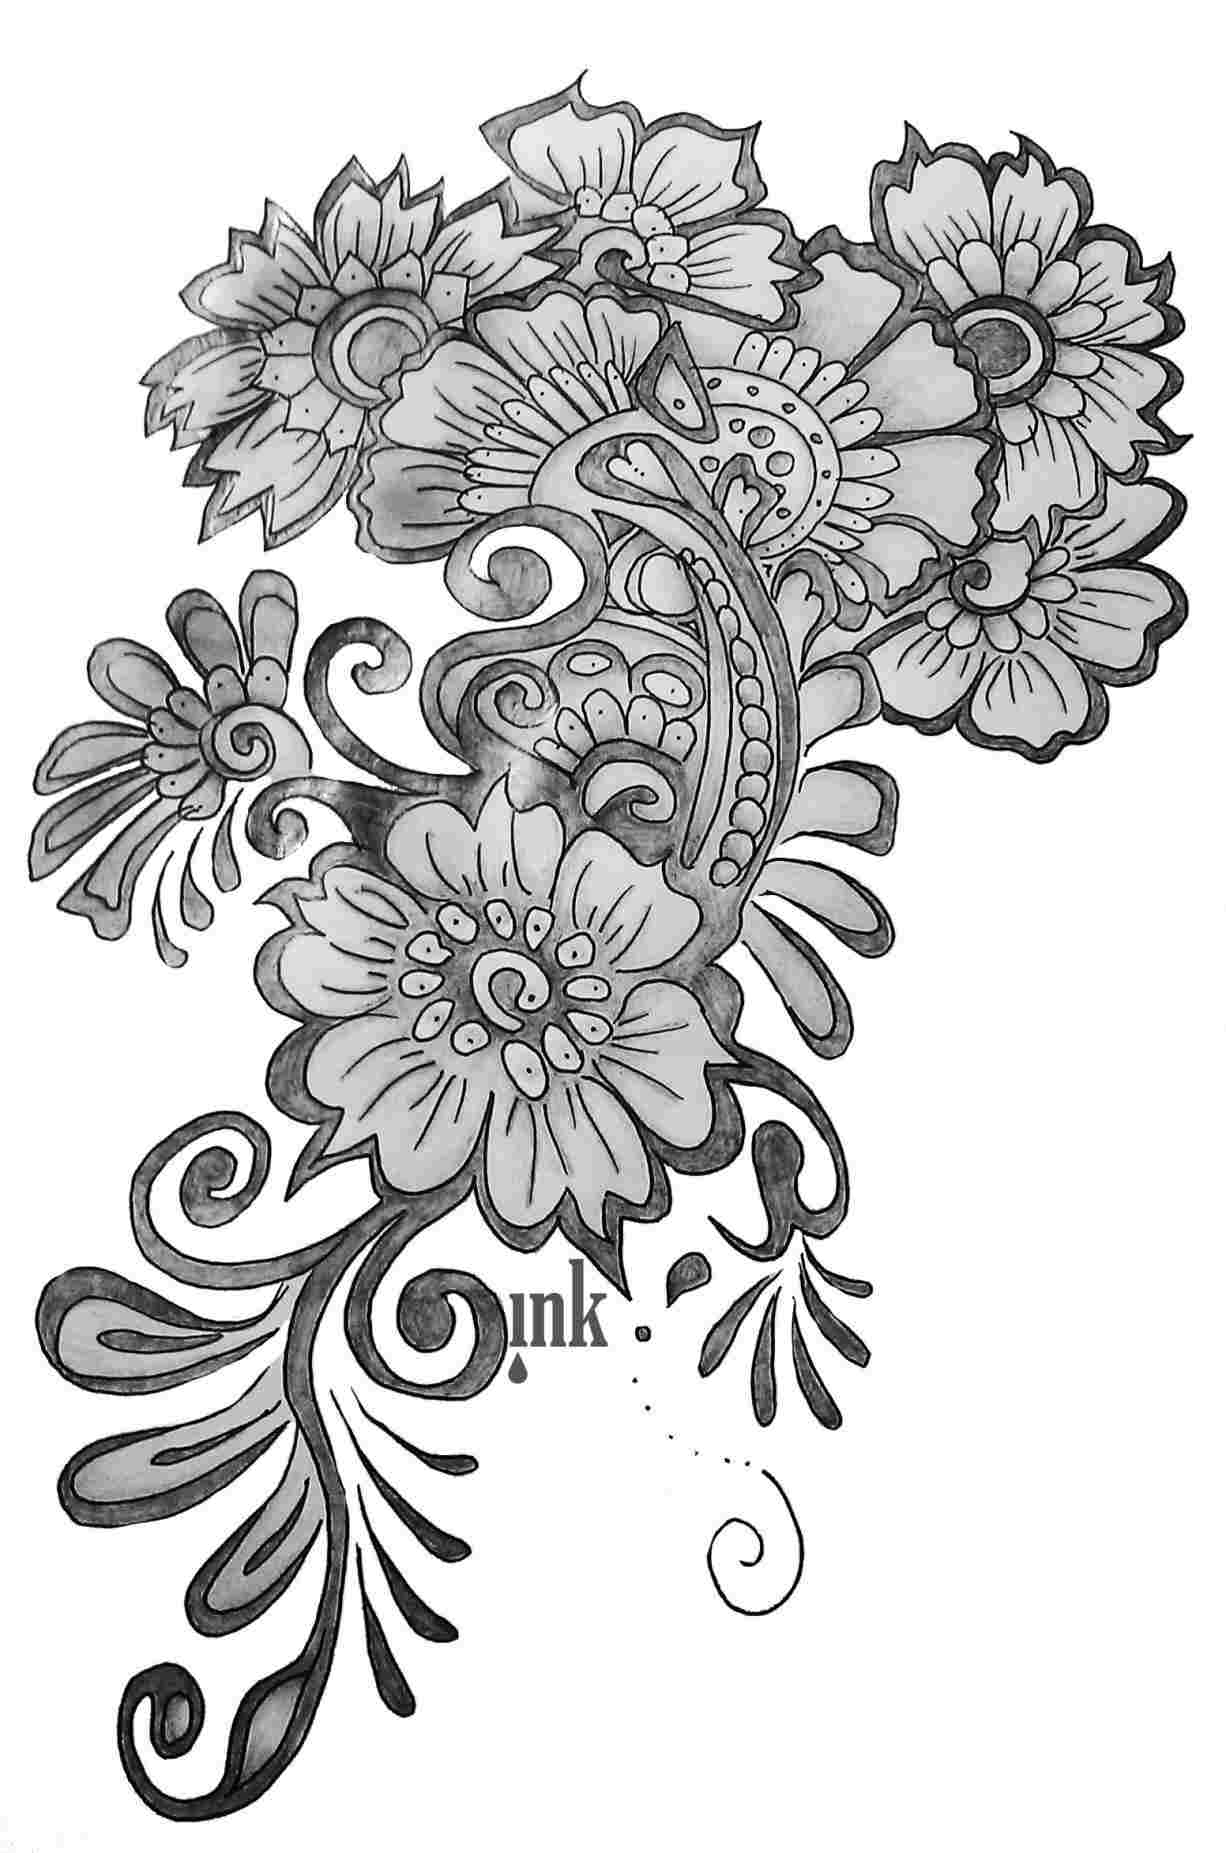 Flower Designs To Draw On Paper - Get Images Four